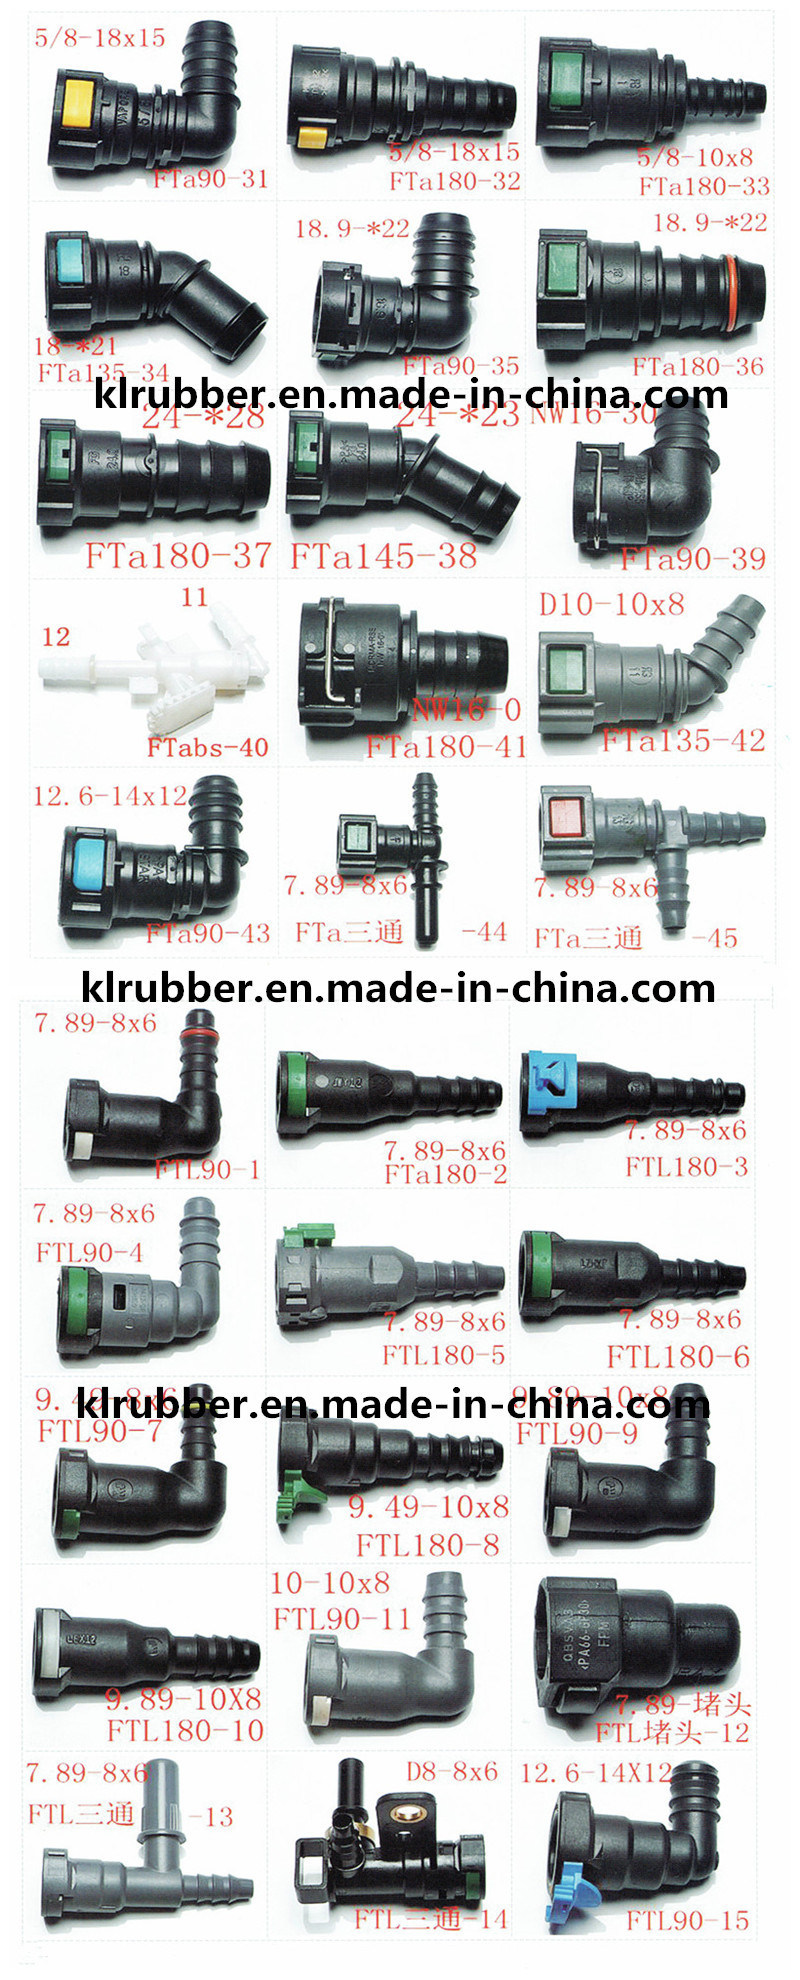 SAE11.80 Low Temperature Steam Connector for Truck System